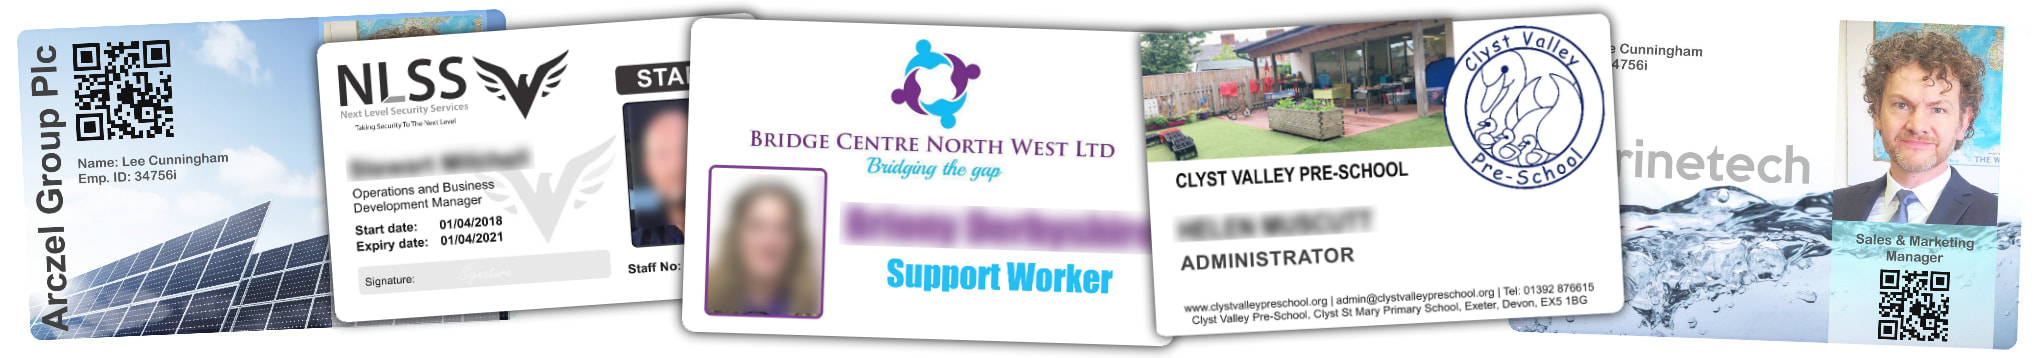 Norwich examples of staff photo ID cards | samples of employee Identity card printing | Workers ID cards printed in Spixworth Horsford Little Plumstead Swardeston Yelverton Hethersett Brundall Poringland Mulbarton Brooke Coltishall Lingwood Hevingham Hempnall Marsham Horning Lenwade Woodton Cantley